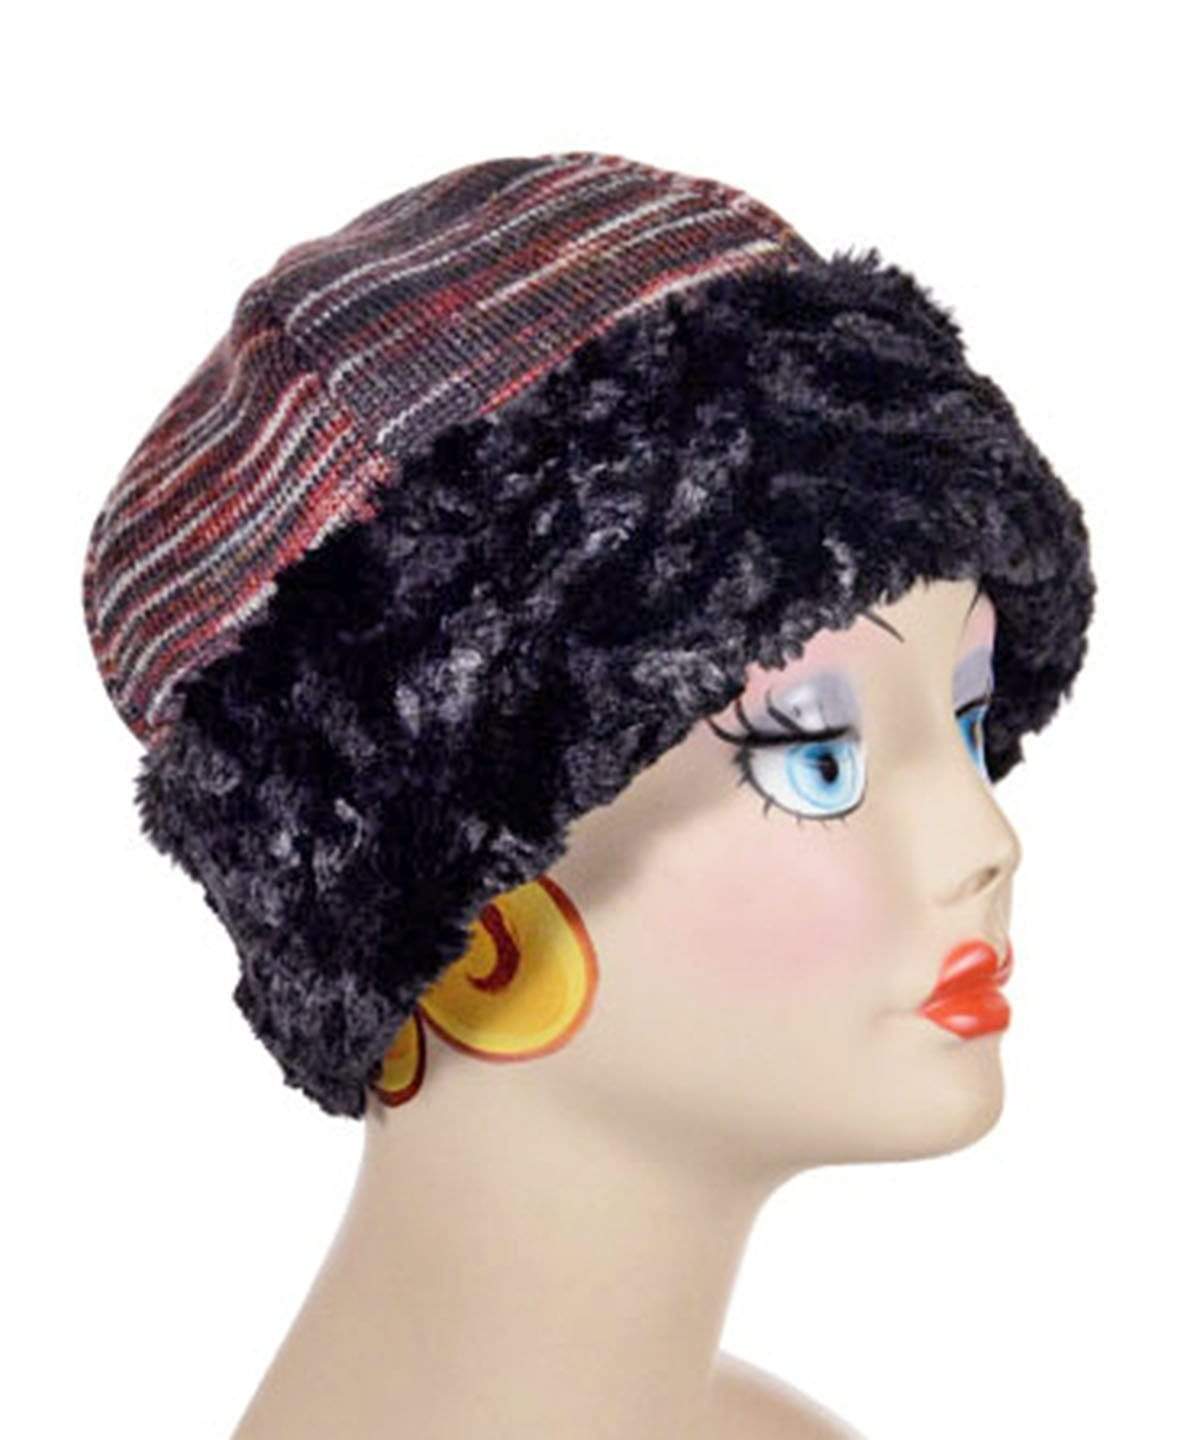 Beanie Hat, reversible – in Sweet Stripes Cherry Cordial lined in Cuddly Black Faux Fur. By Pandemonium Millinery